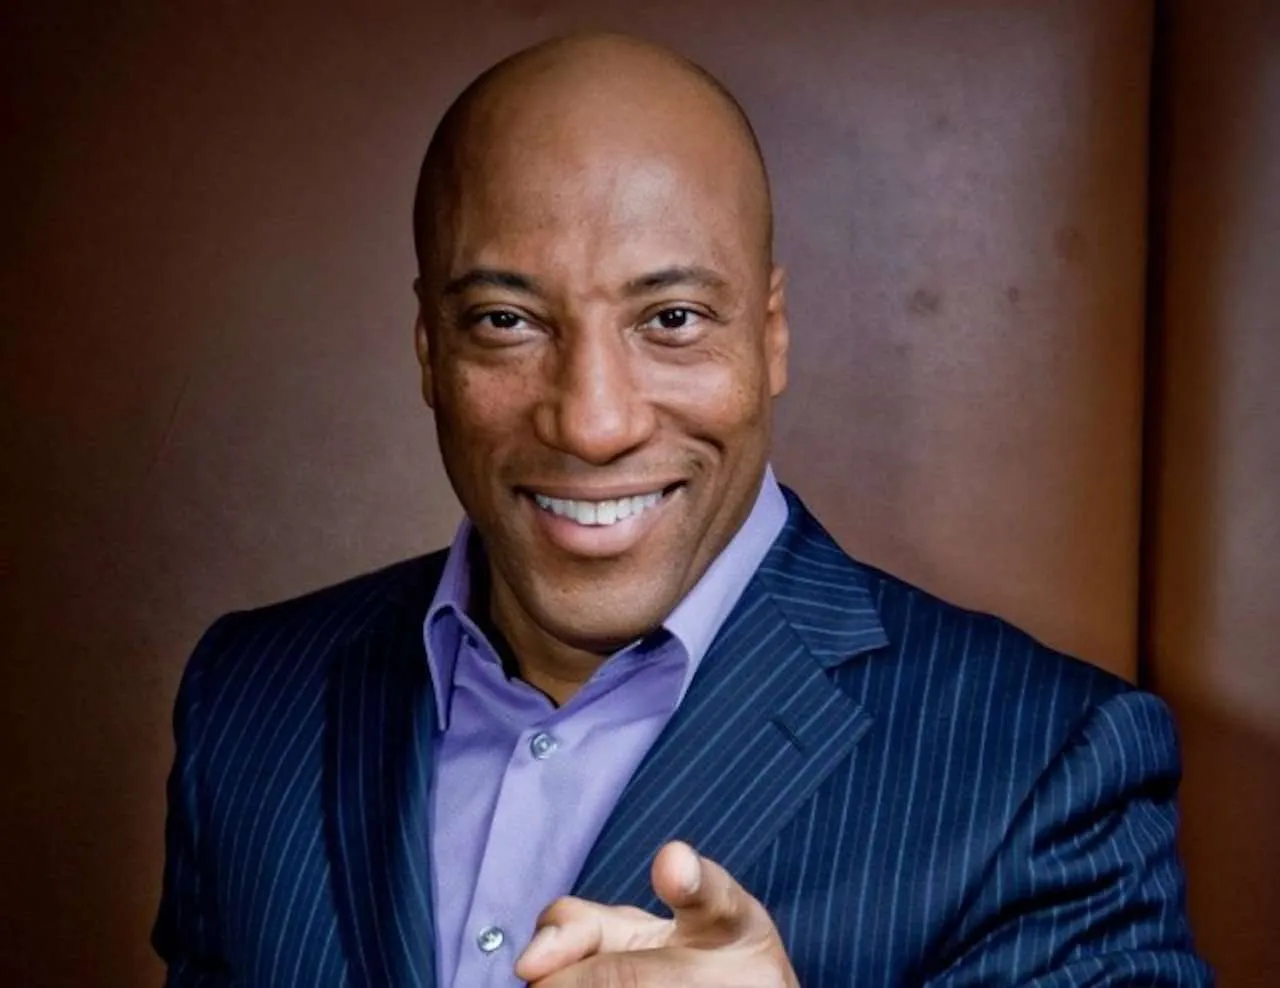 Byron Allen pointing his finger at the camera with a big smile on his face